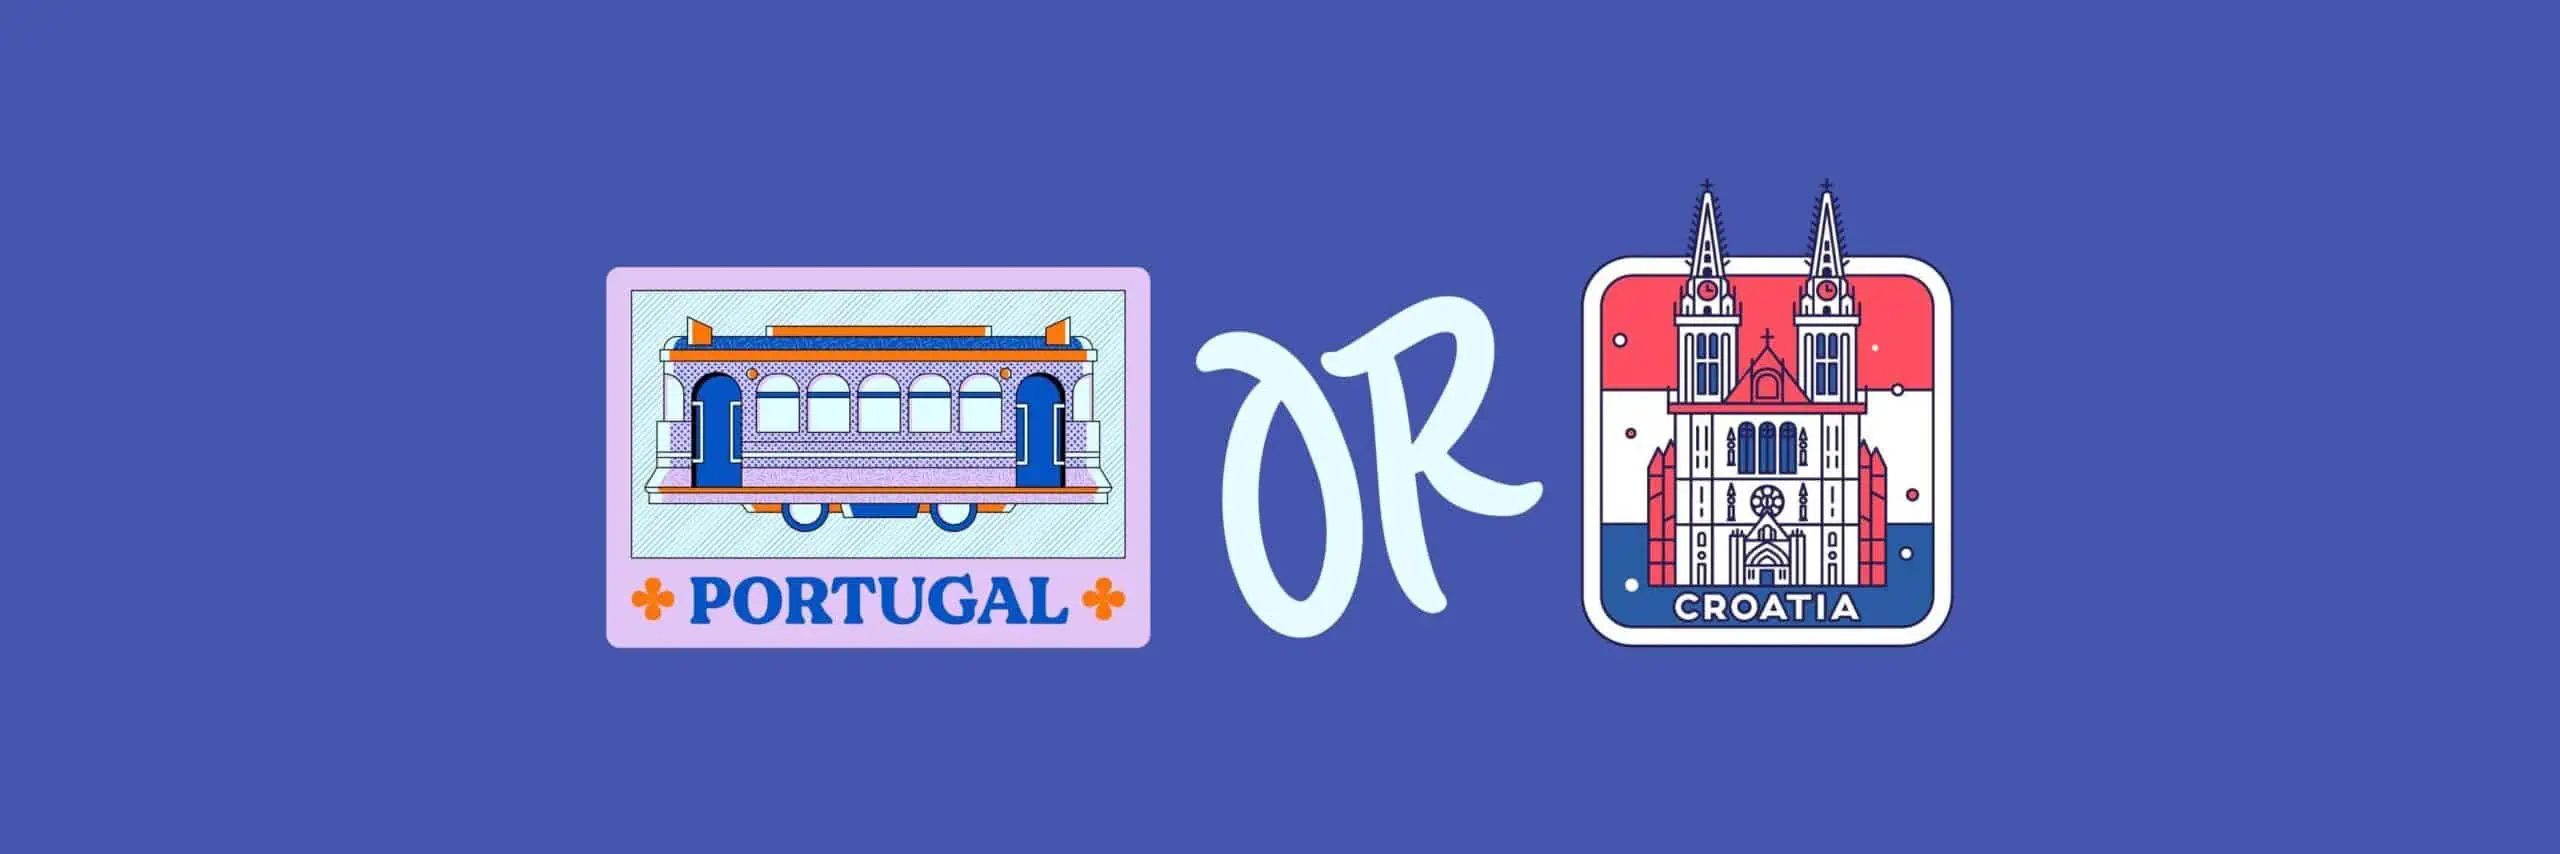 Portugal or Croatia for Digital Nomads_ Comparing Lifestyle, Visas and Taxes